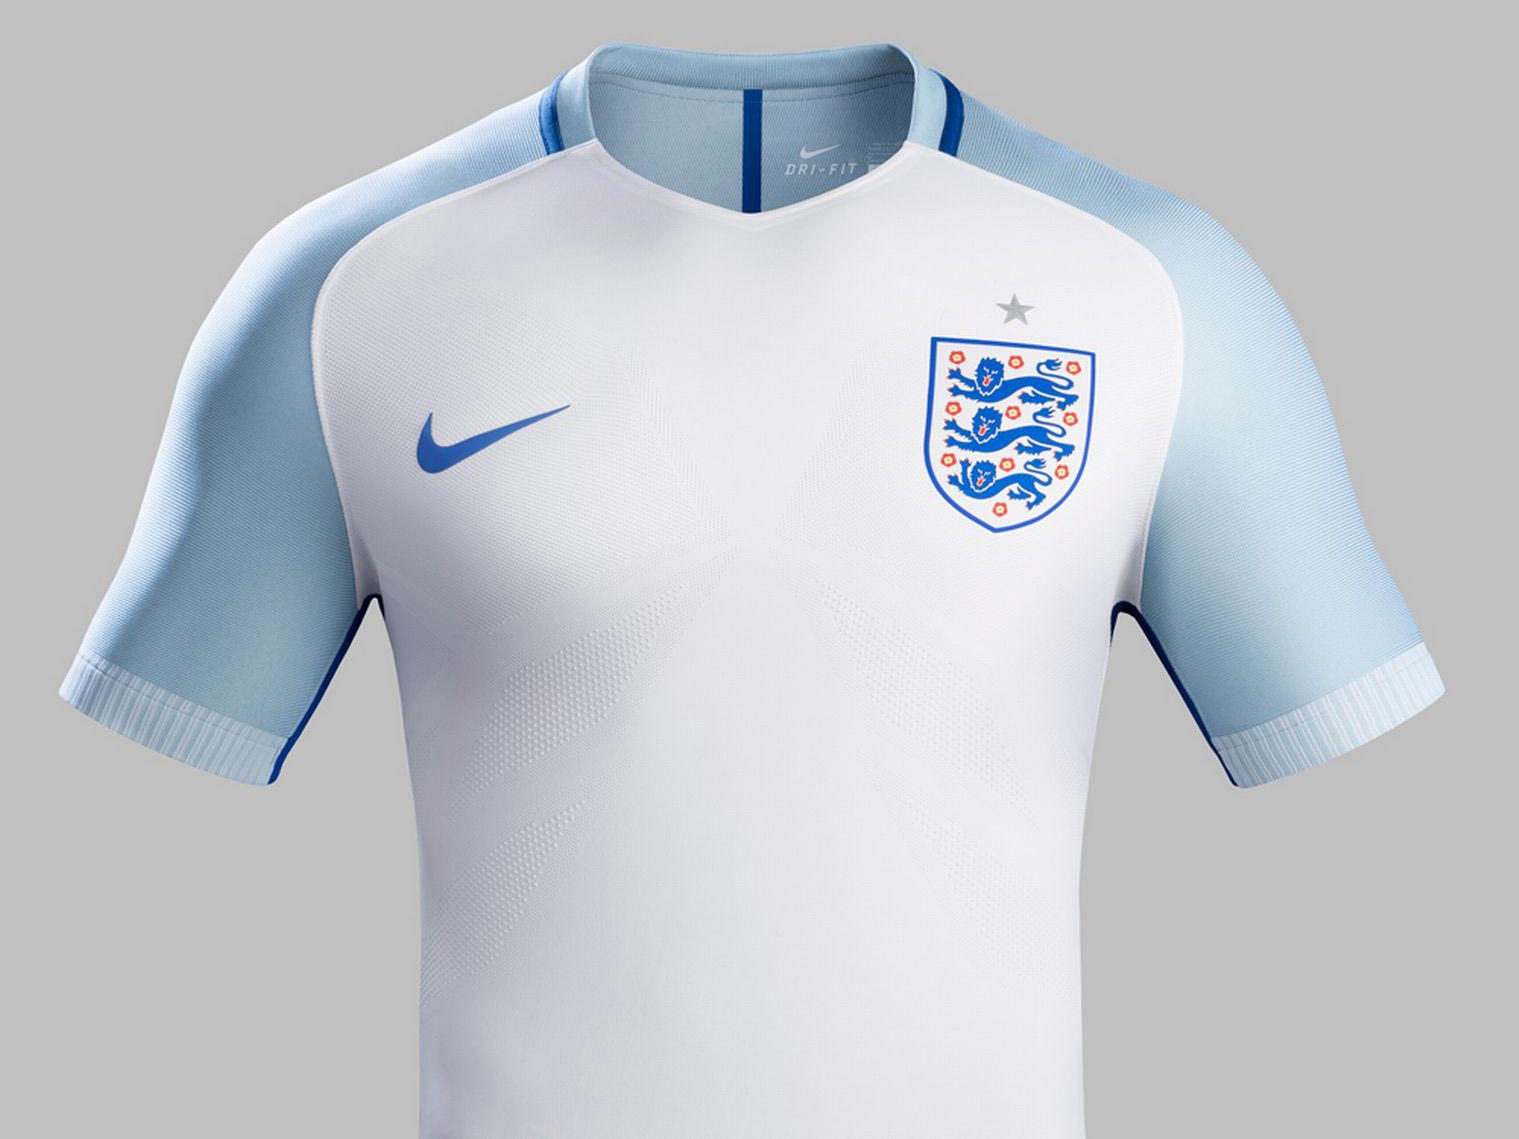 Transfer News Live on Twitter: "The FA and Nike have agreed a new  £400million deal that will see England wear the Nike kit until 2030.  (Source: Daily Mail) https://t.co/JsEPCD6LKa" / Twitter